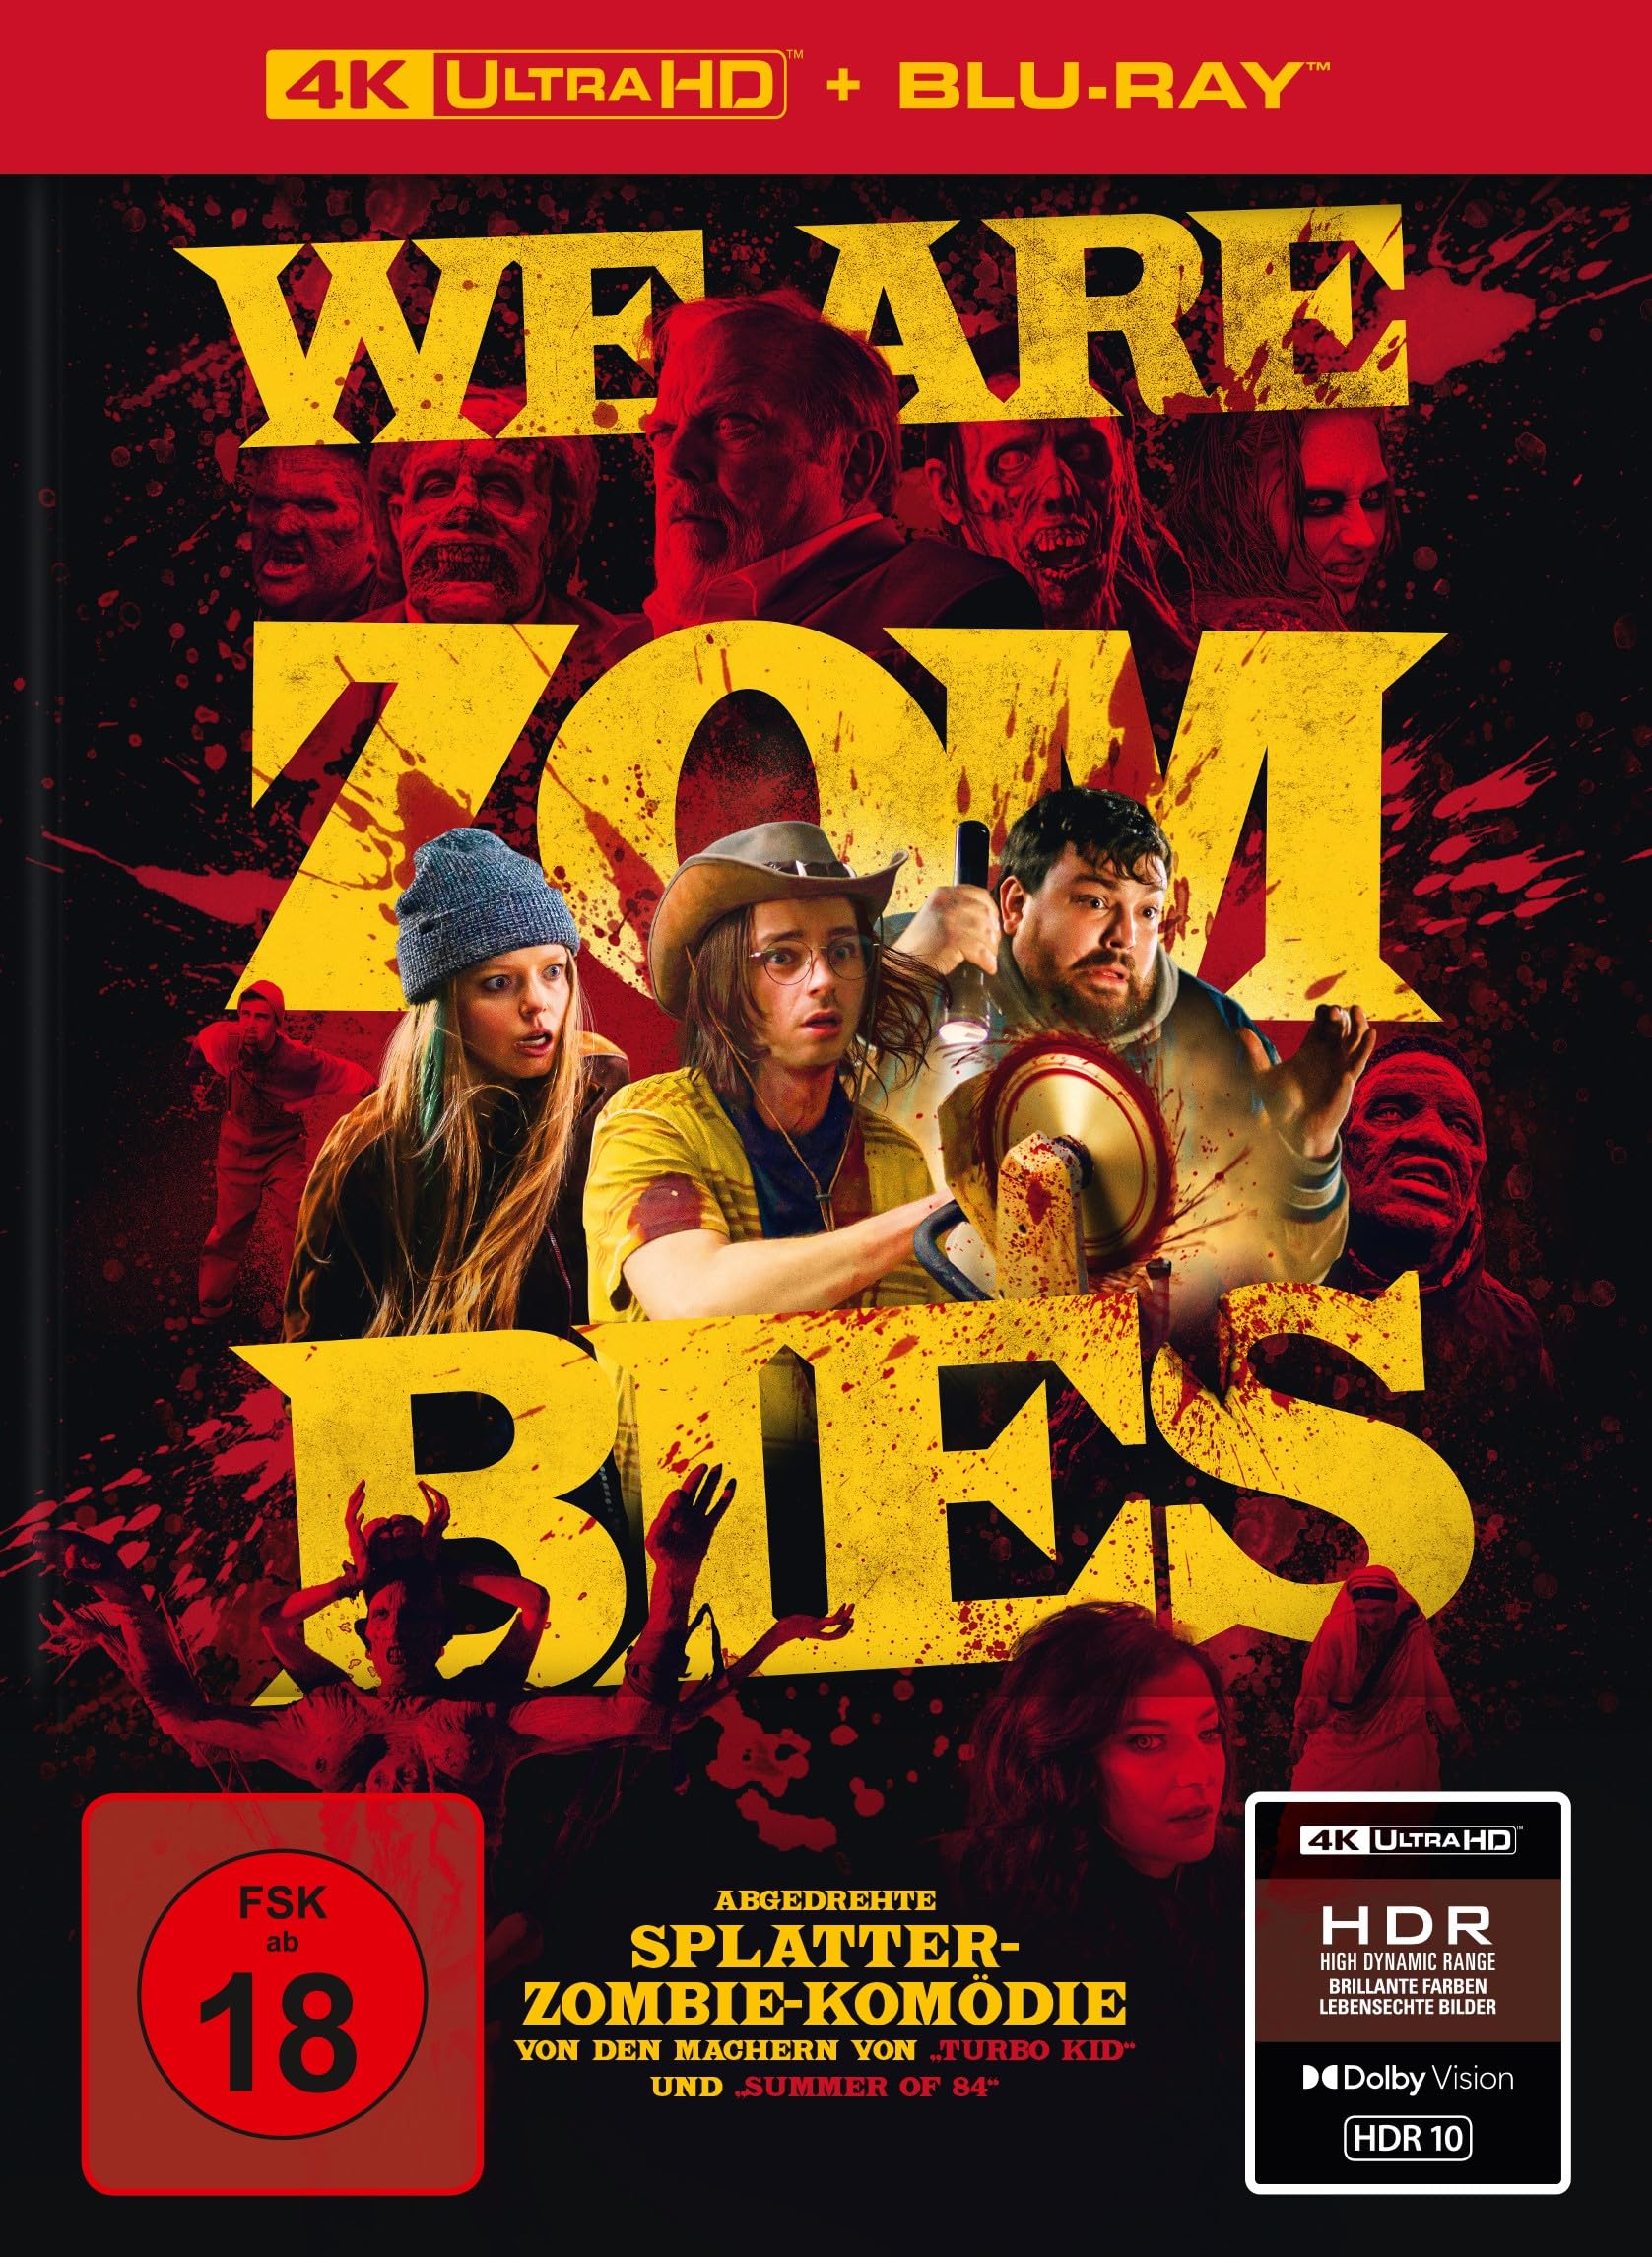 We Are Zombies - 2-Disc Limited Collector's Edition im Mediabook (4K Ultra HD + Blu-ray)